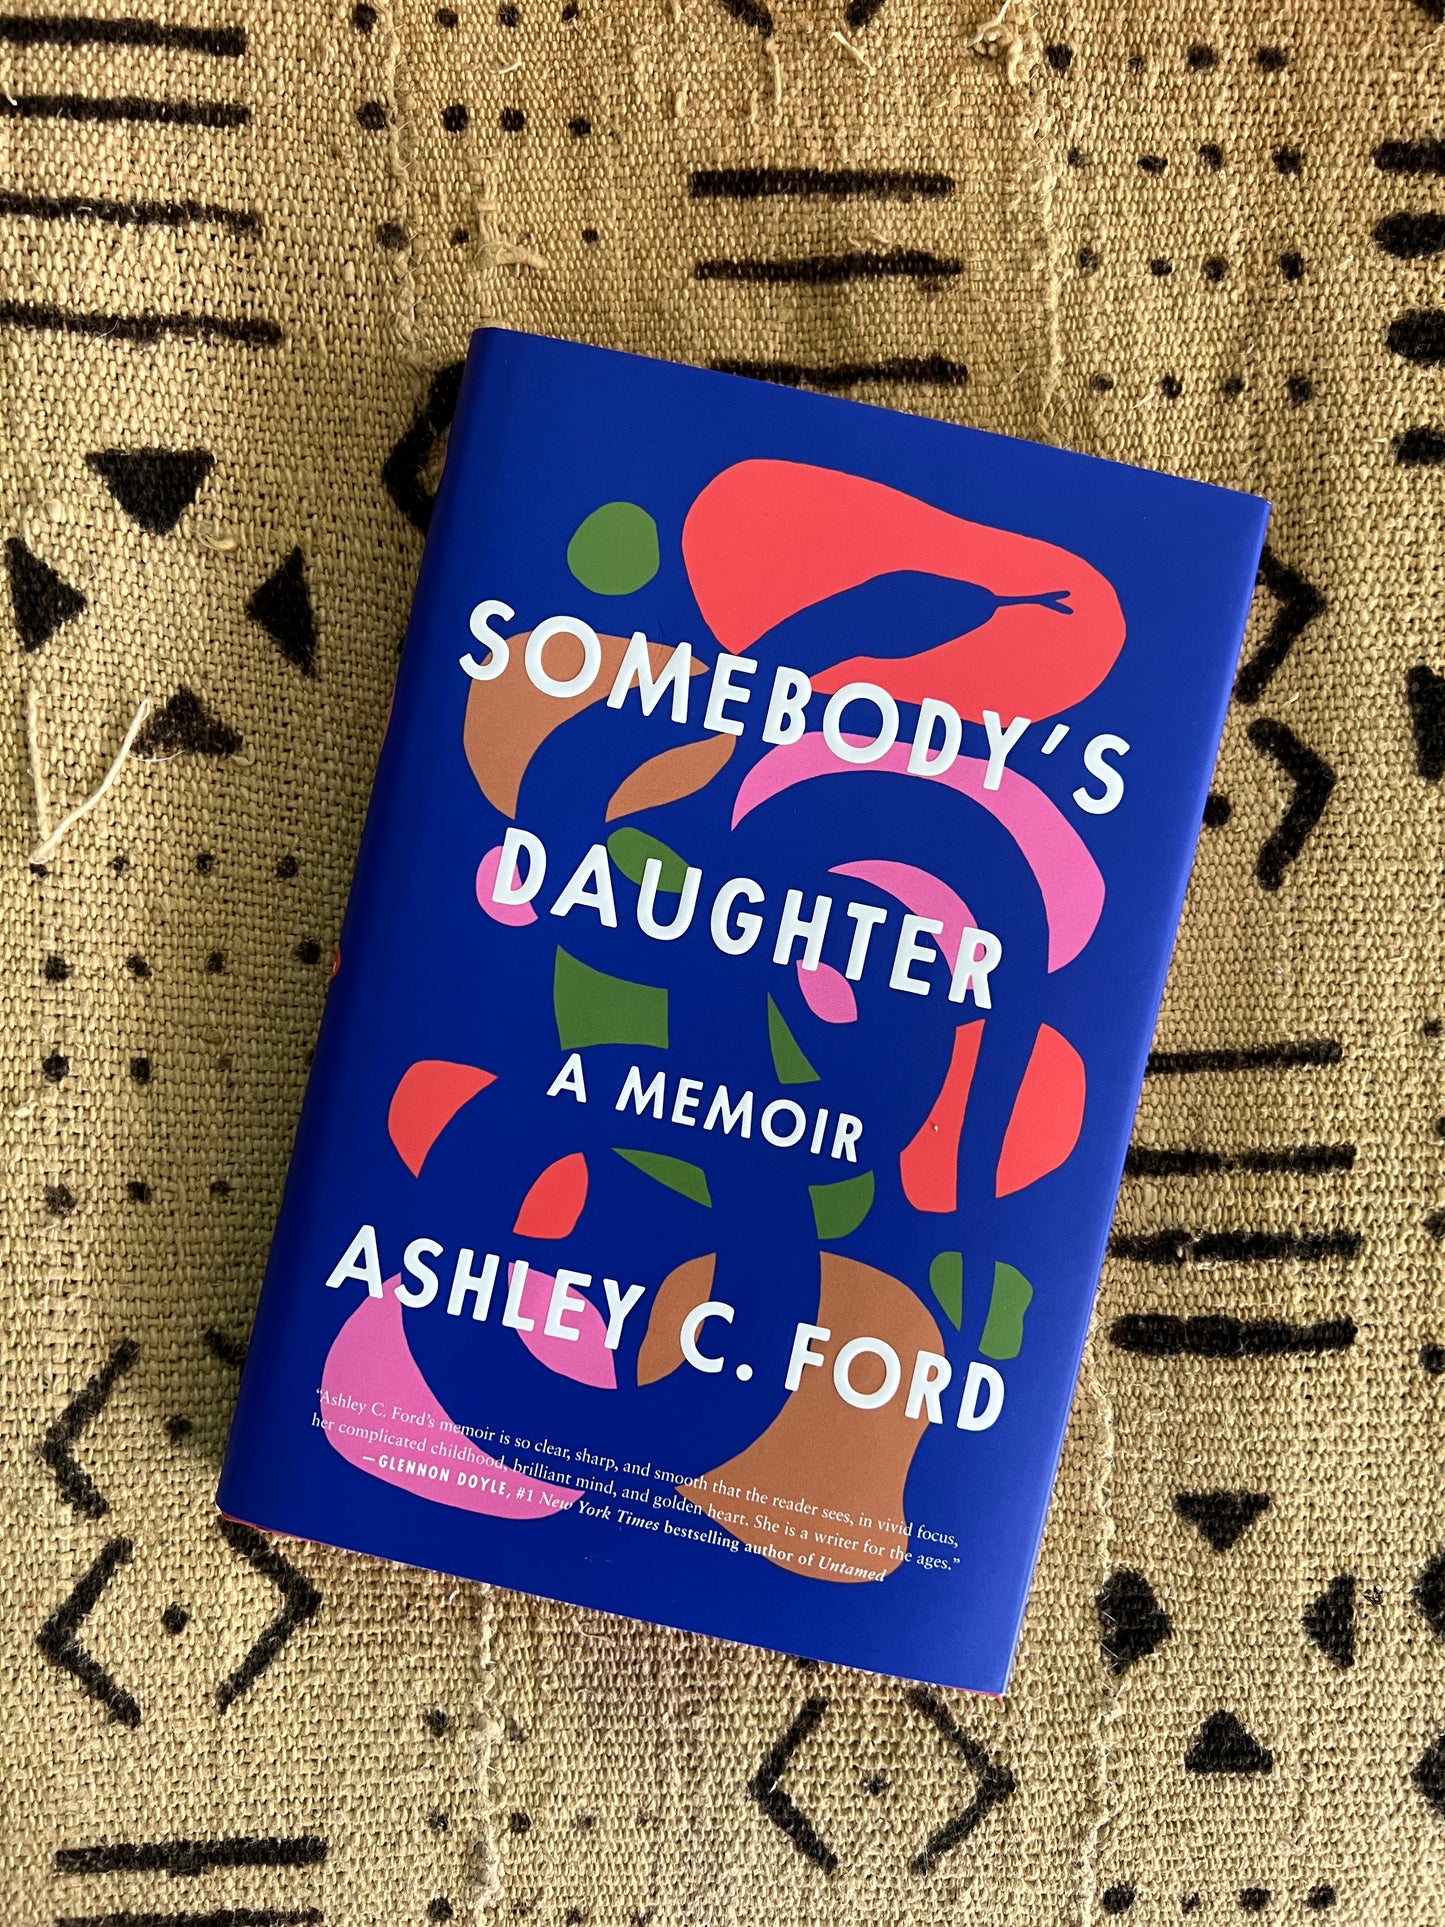 Somebody’s Daughter - New and Autographed By The Author